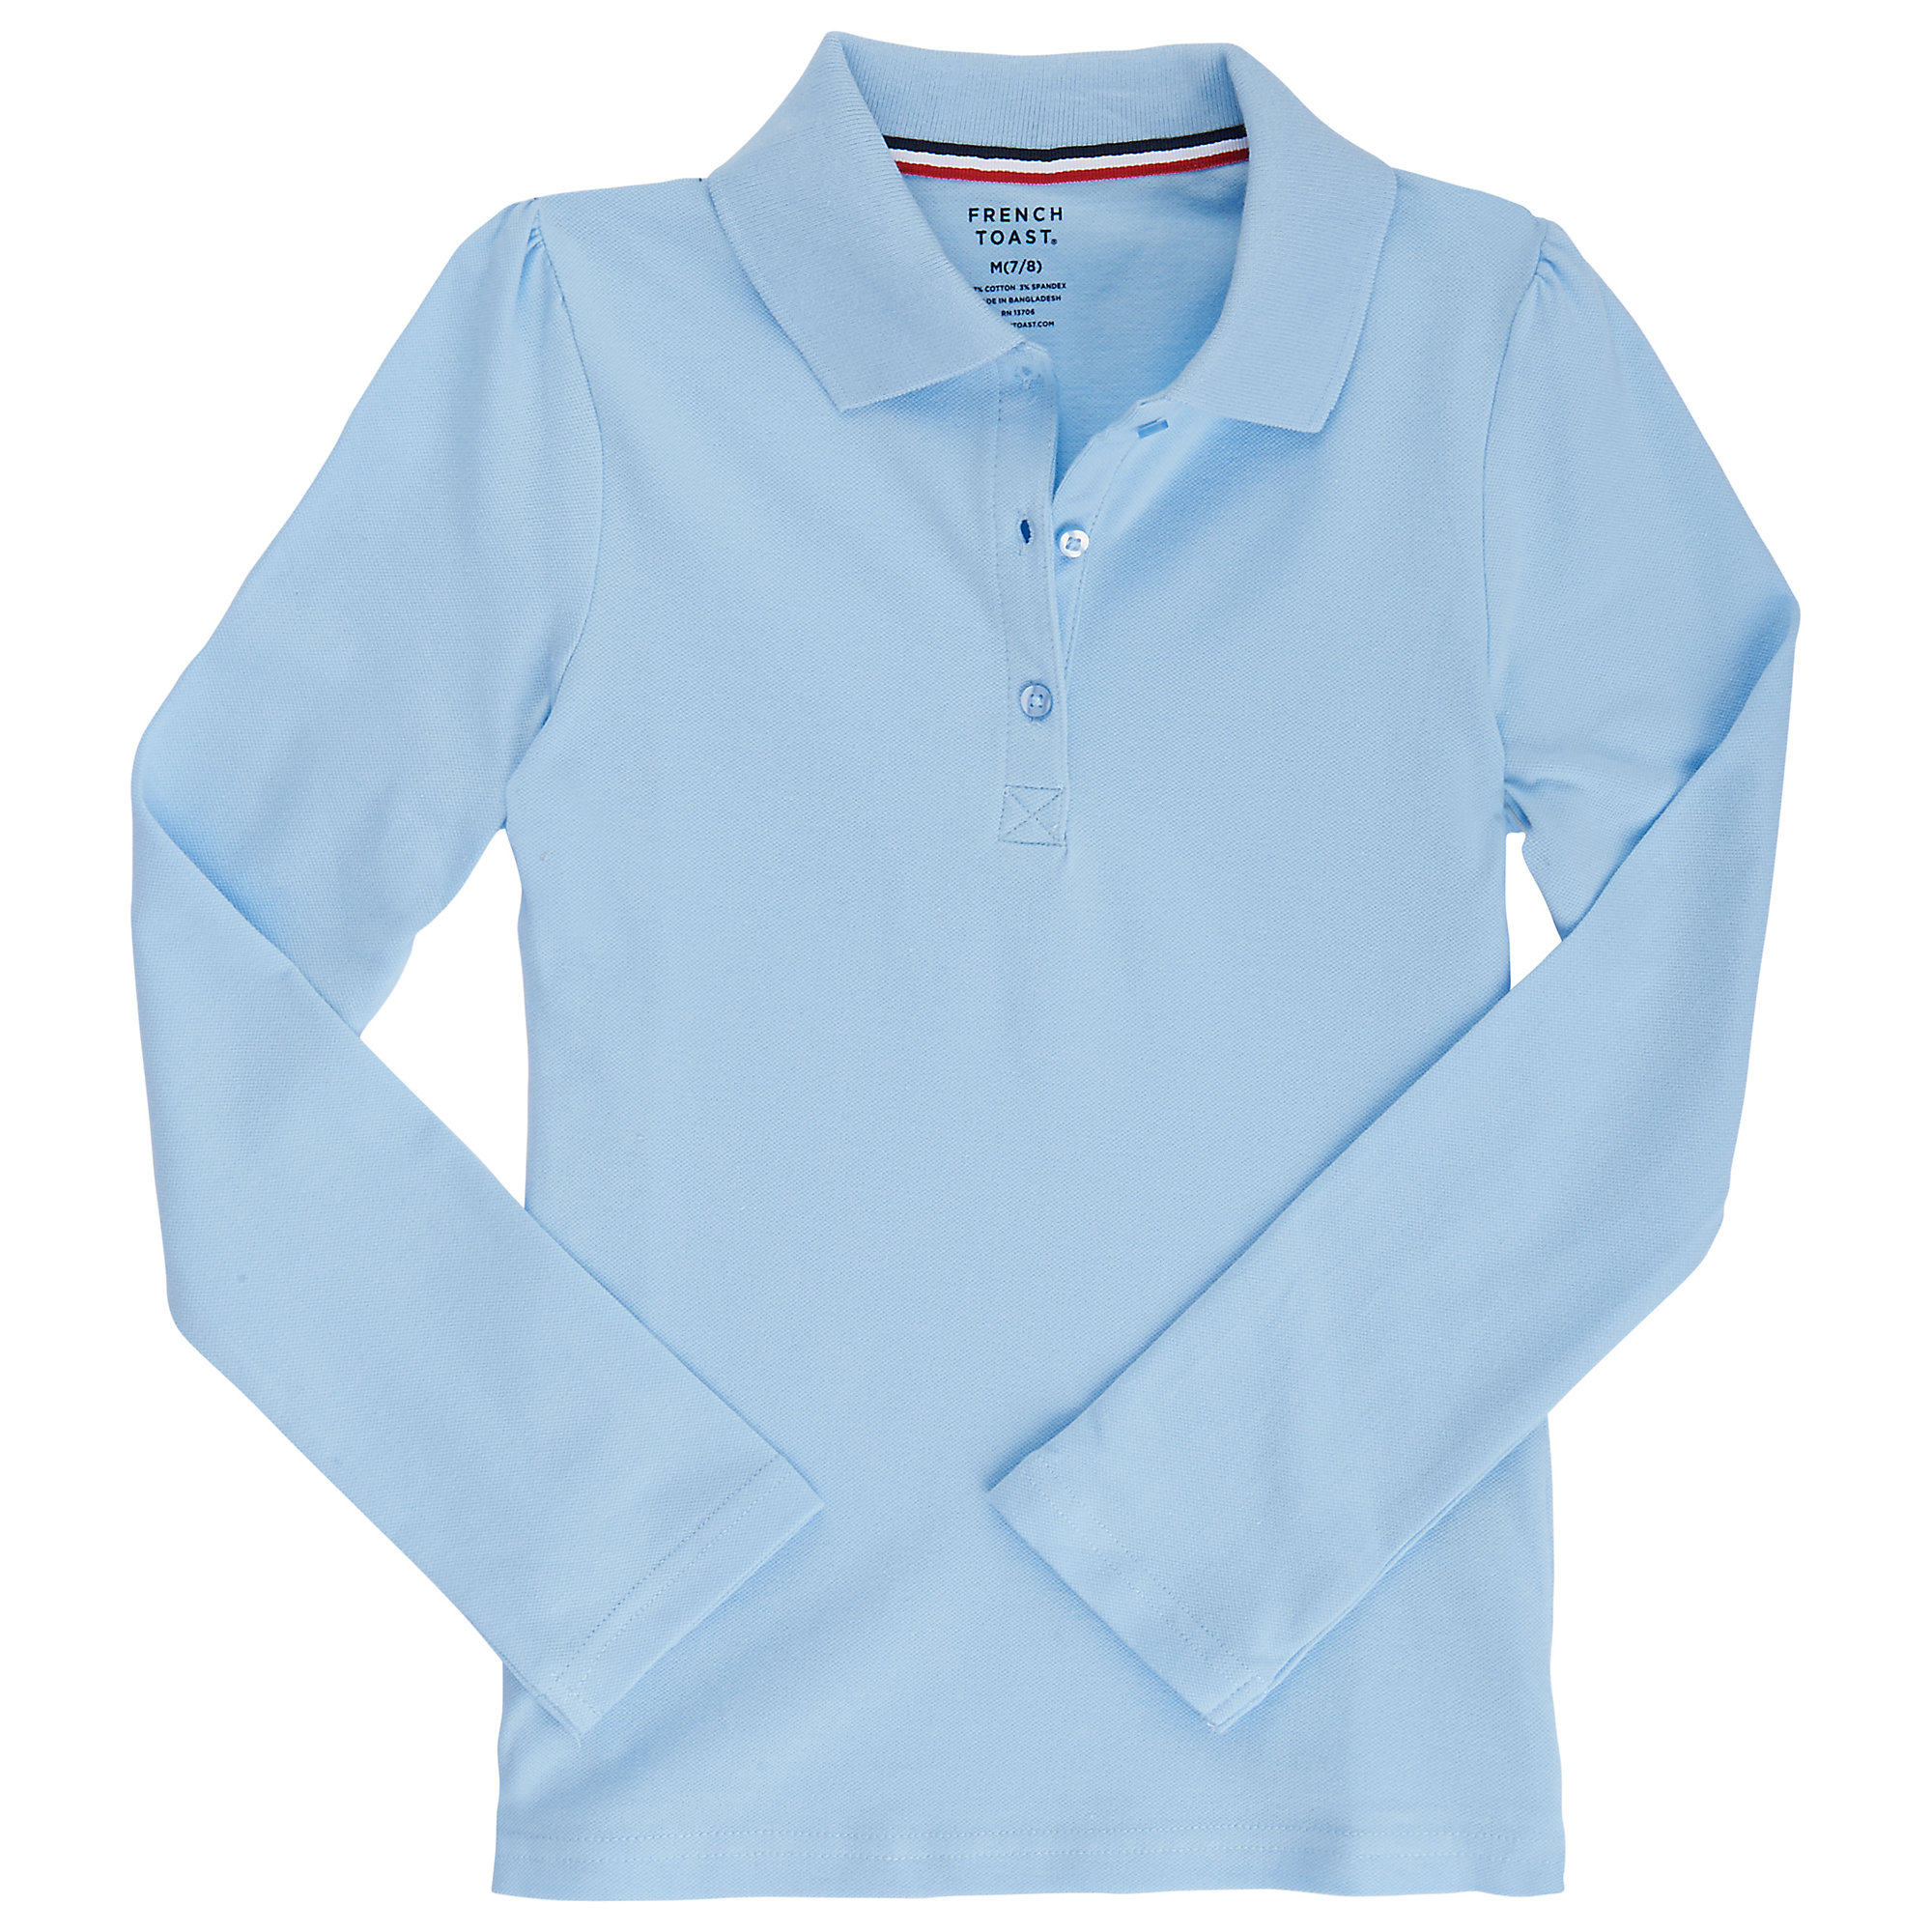 At School by French Toast Long Sleeve Stretch Pique Polo